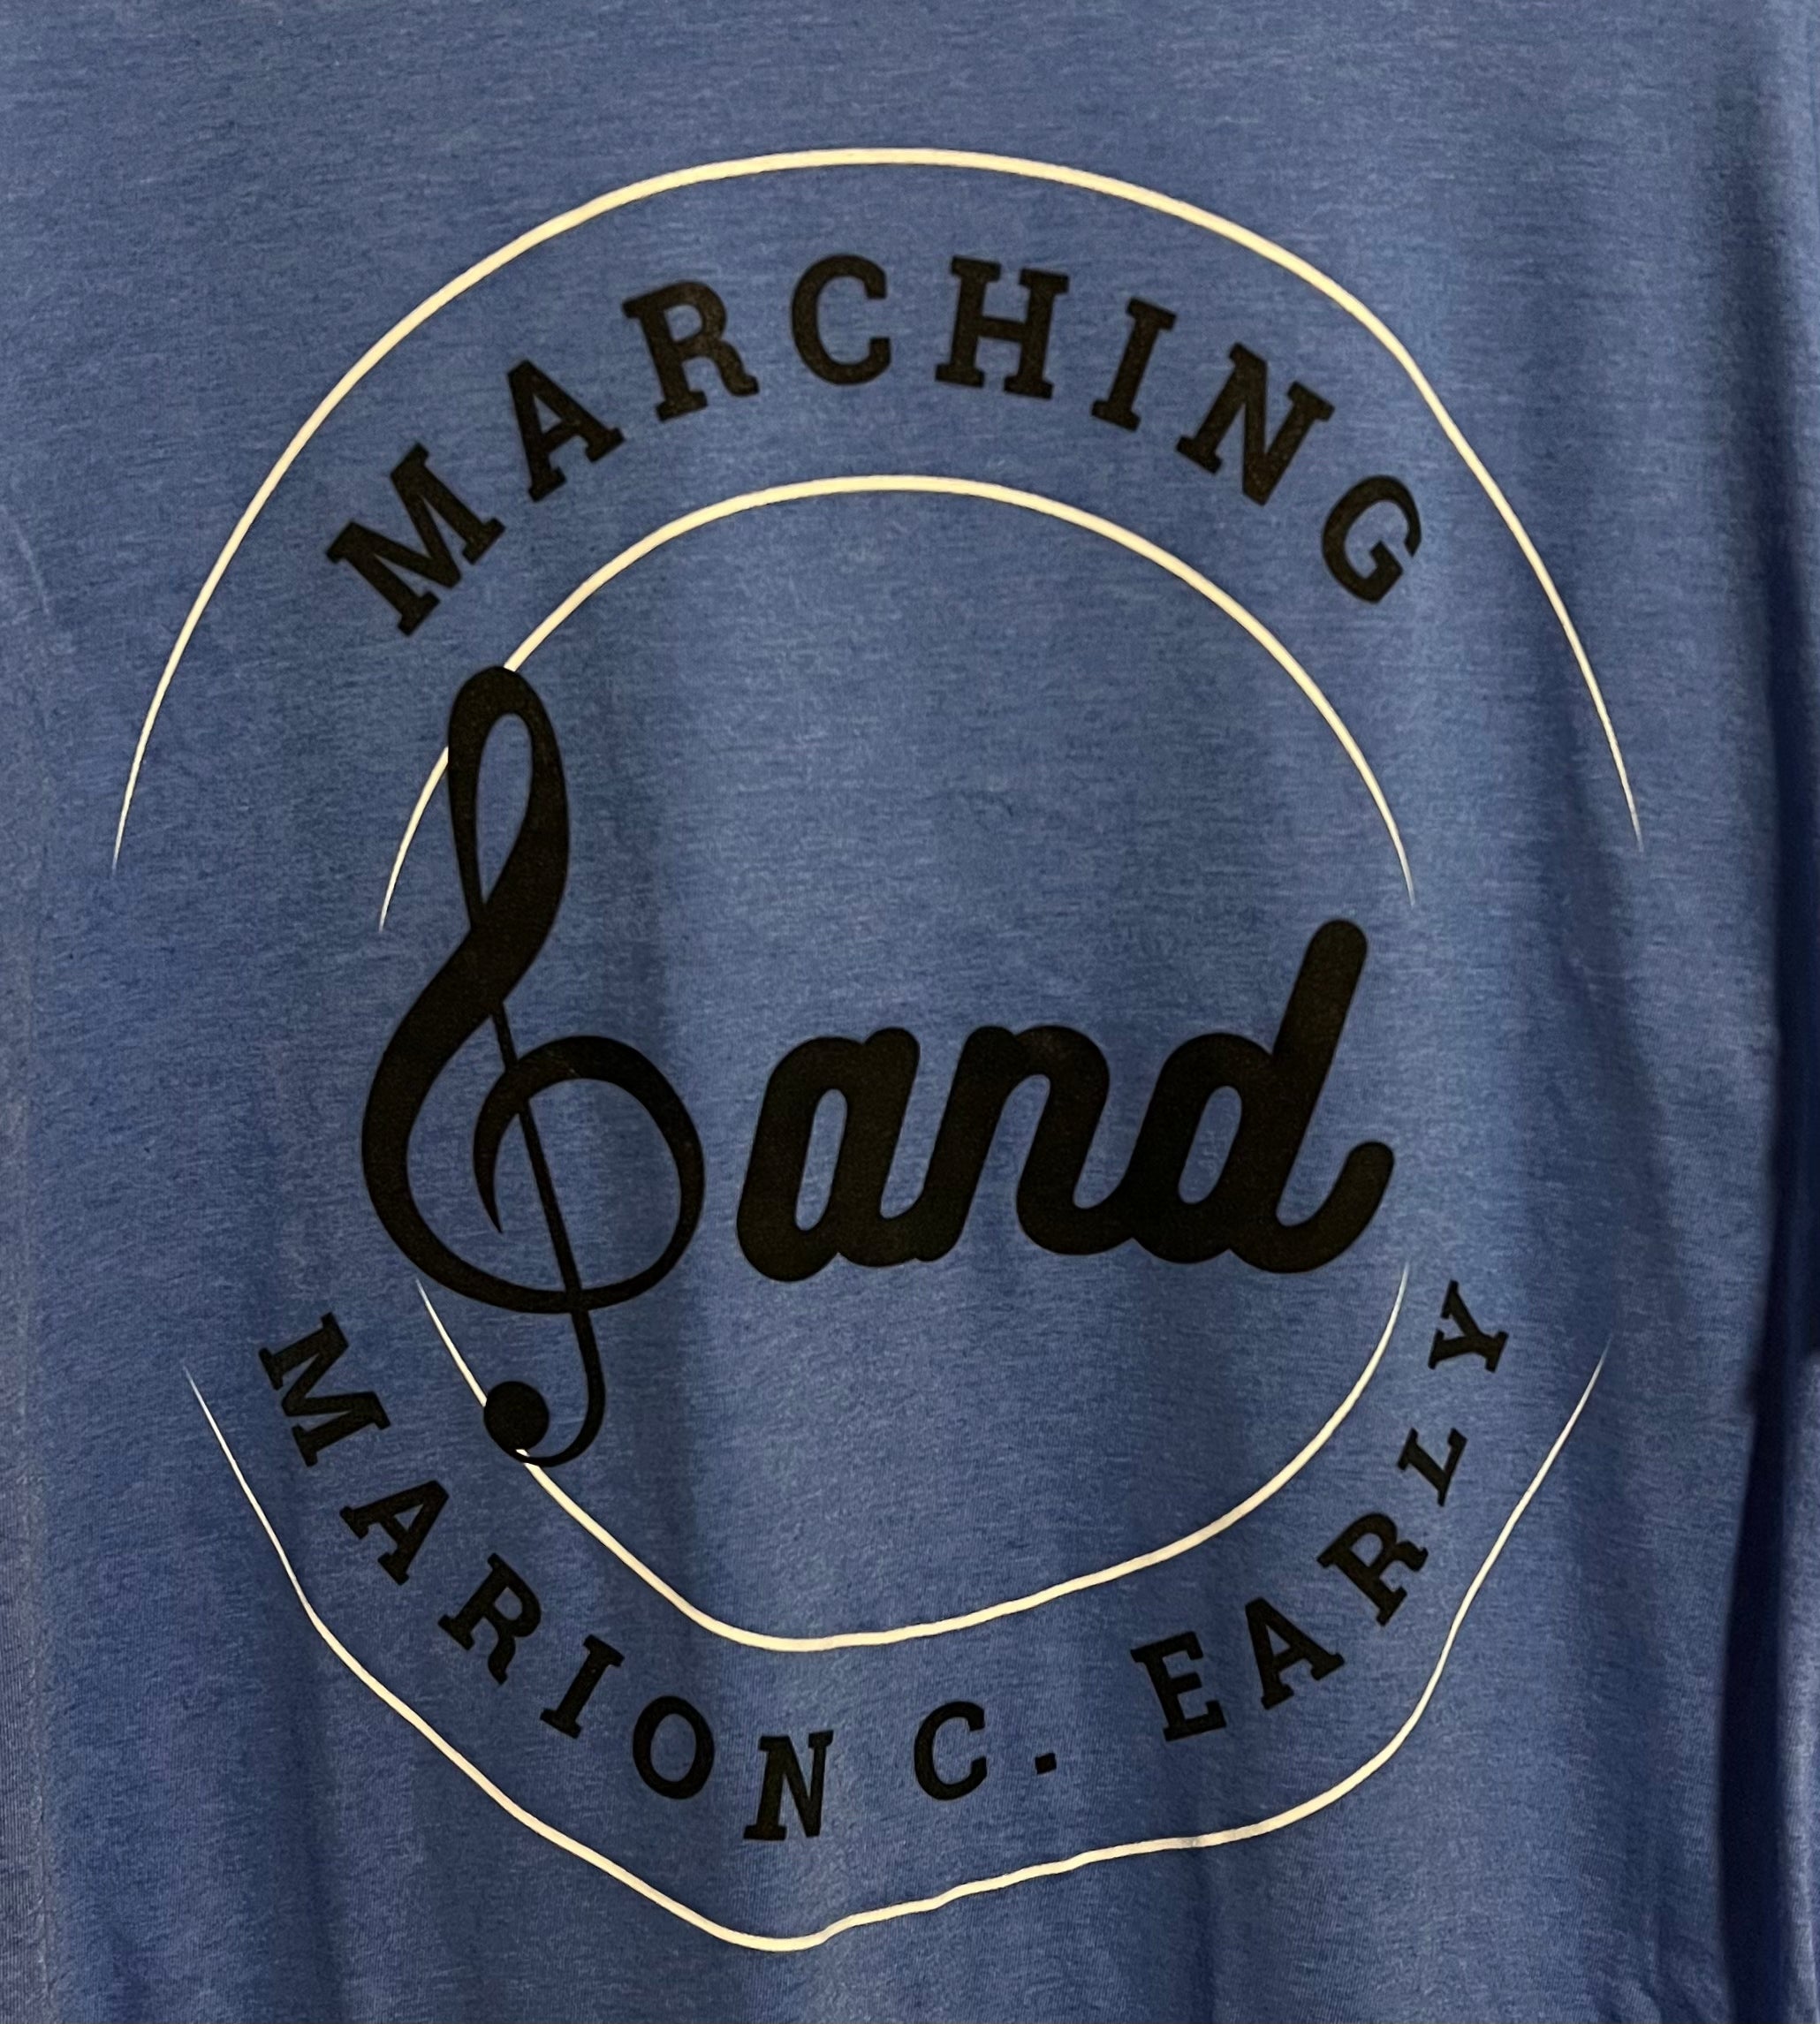 MCE Marching Band